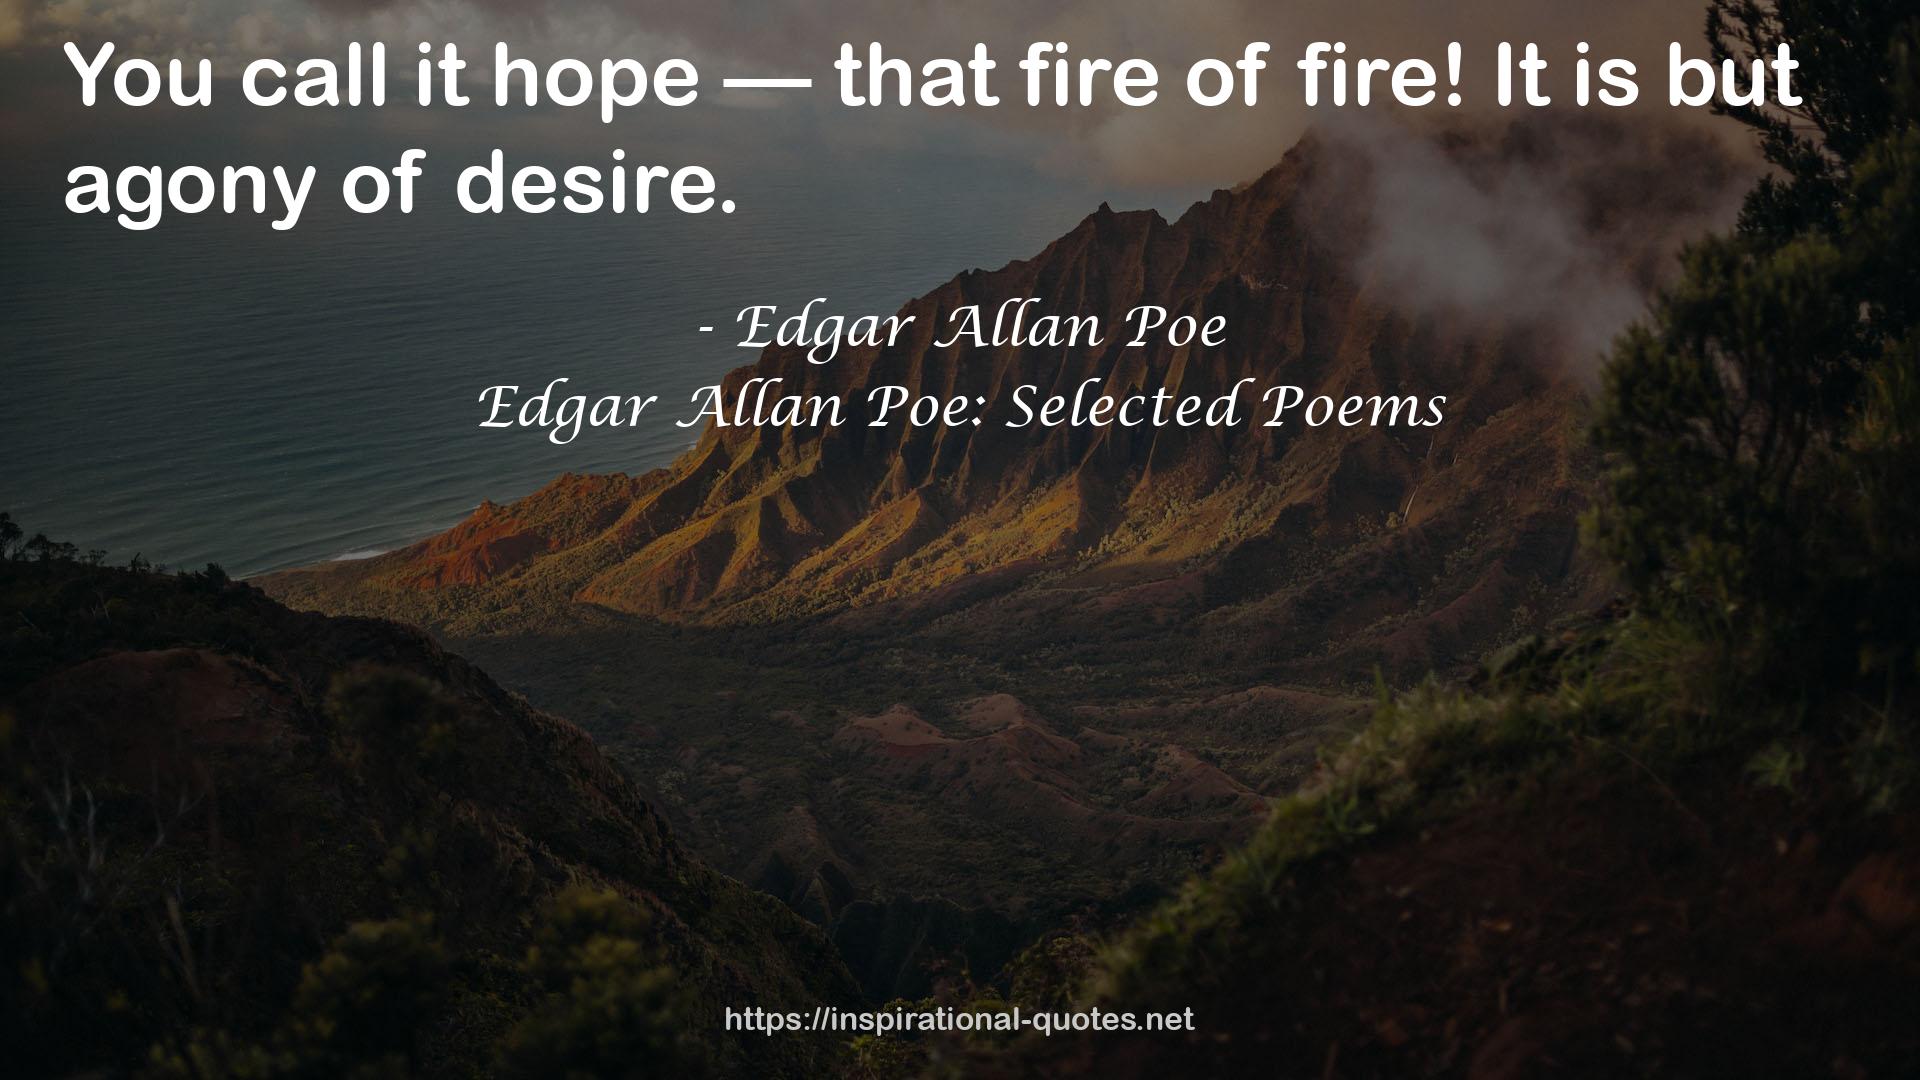 Edgar Allan Poe: Selected Poems QUOTES